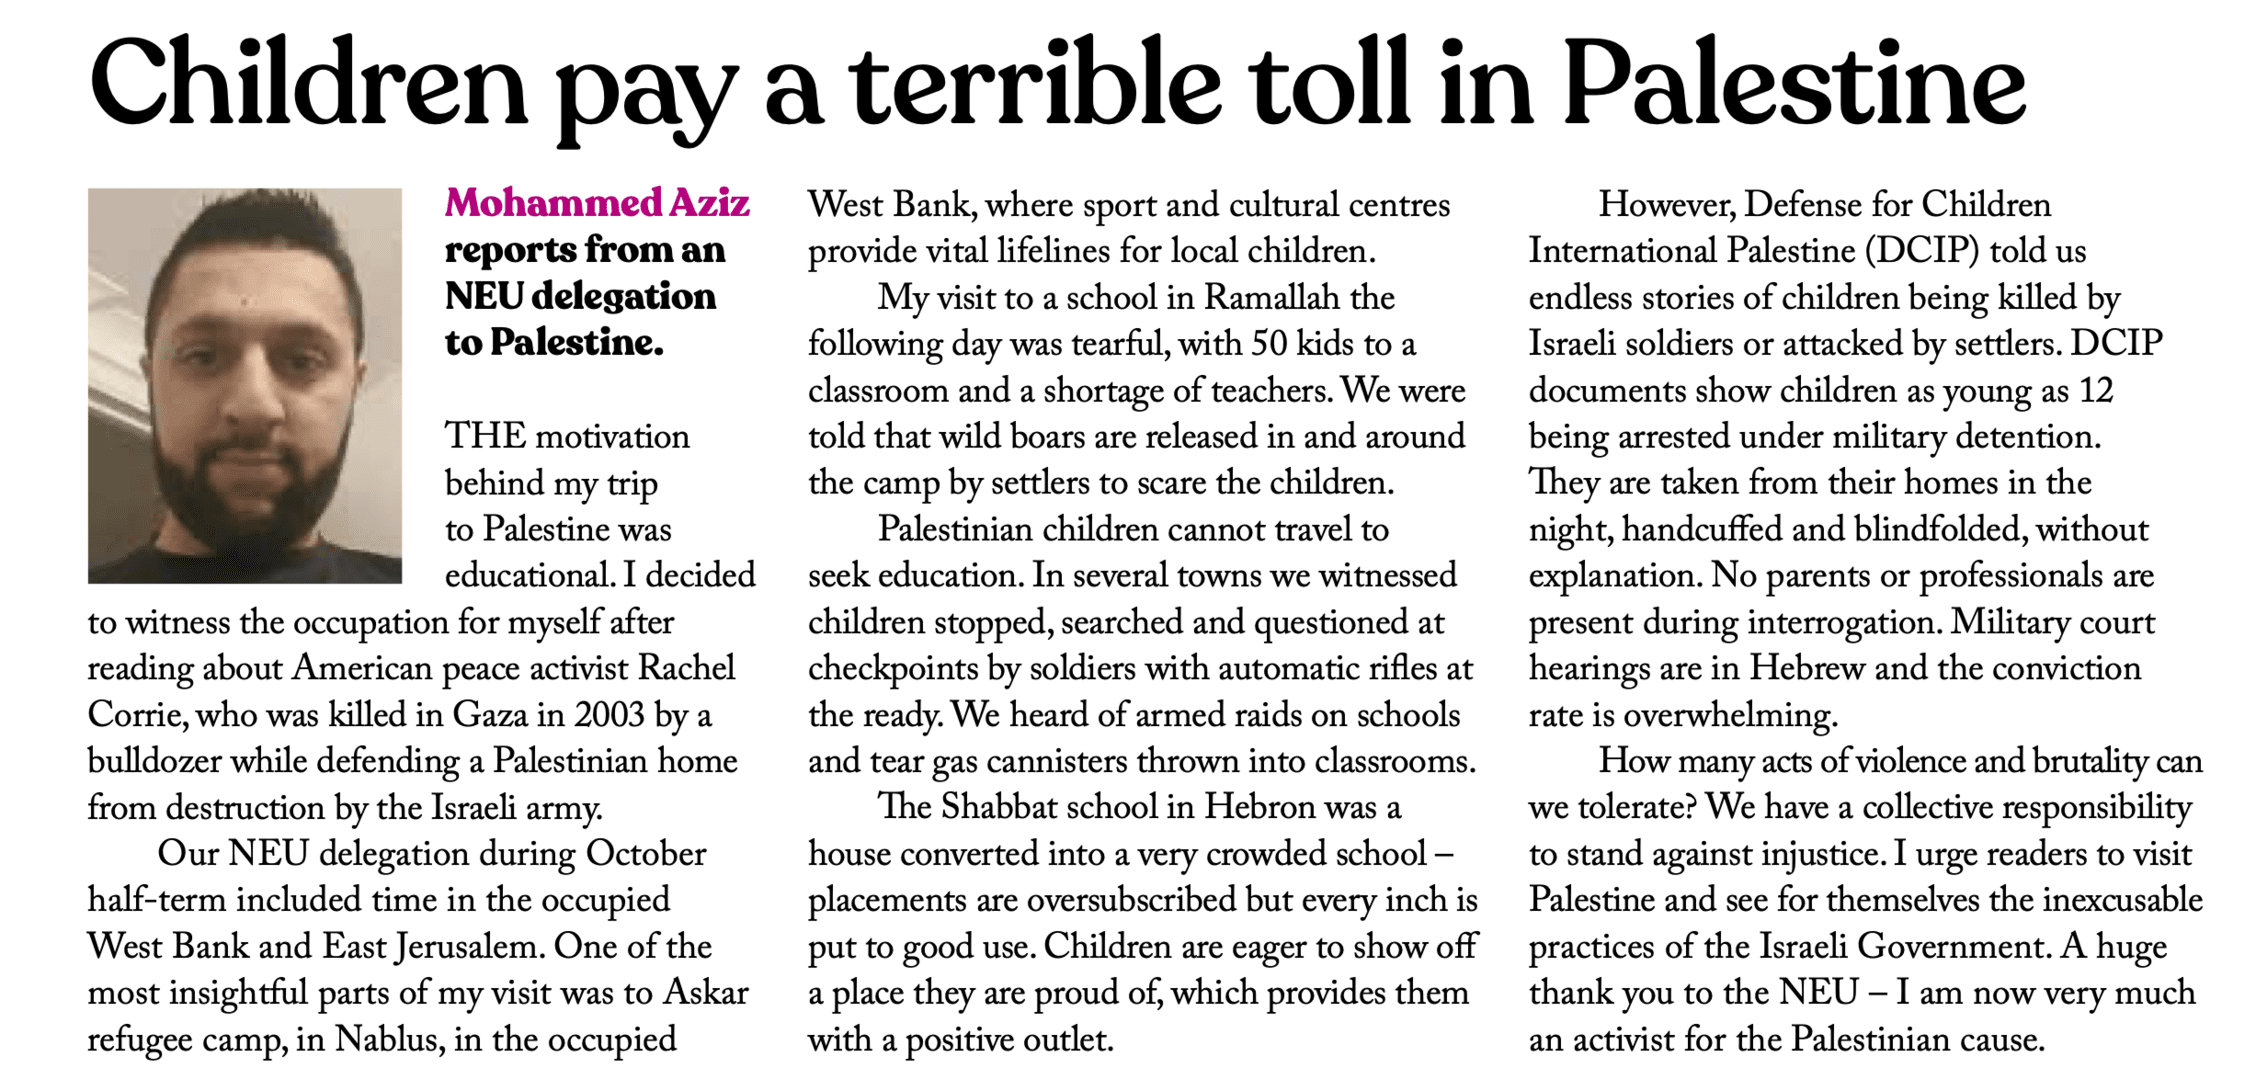 'Children pay a terrible toll in Palestine'